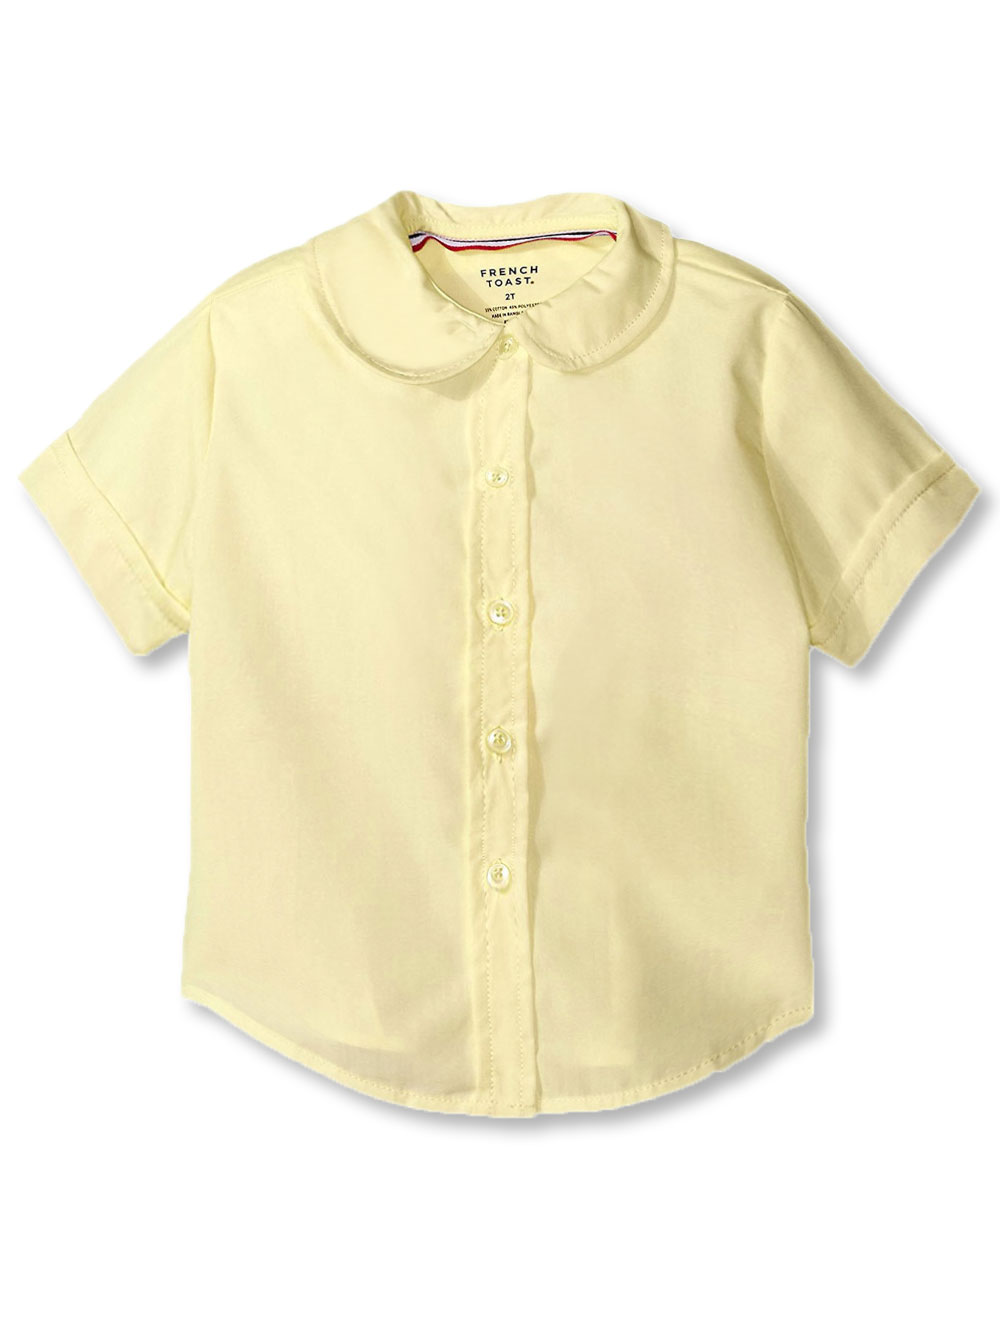 At School by French Toast French Toast Big Girls' S/S Peter Pan Fitted Shirt (Sizes 7 - 20) - yellow, 7